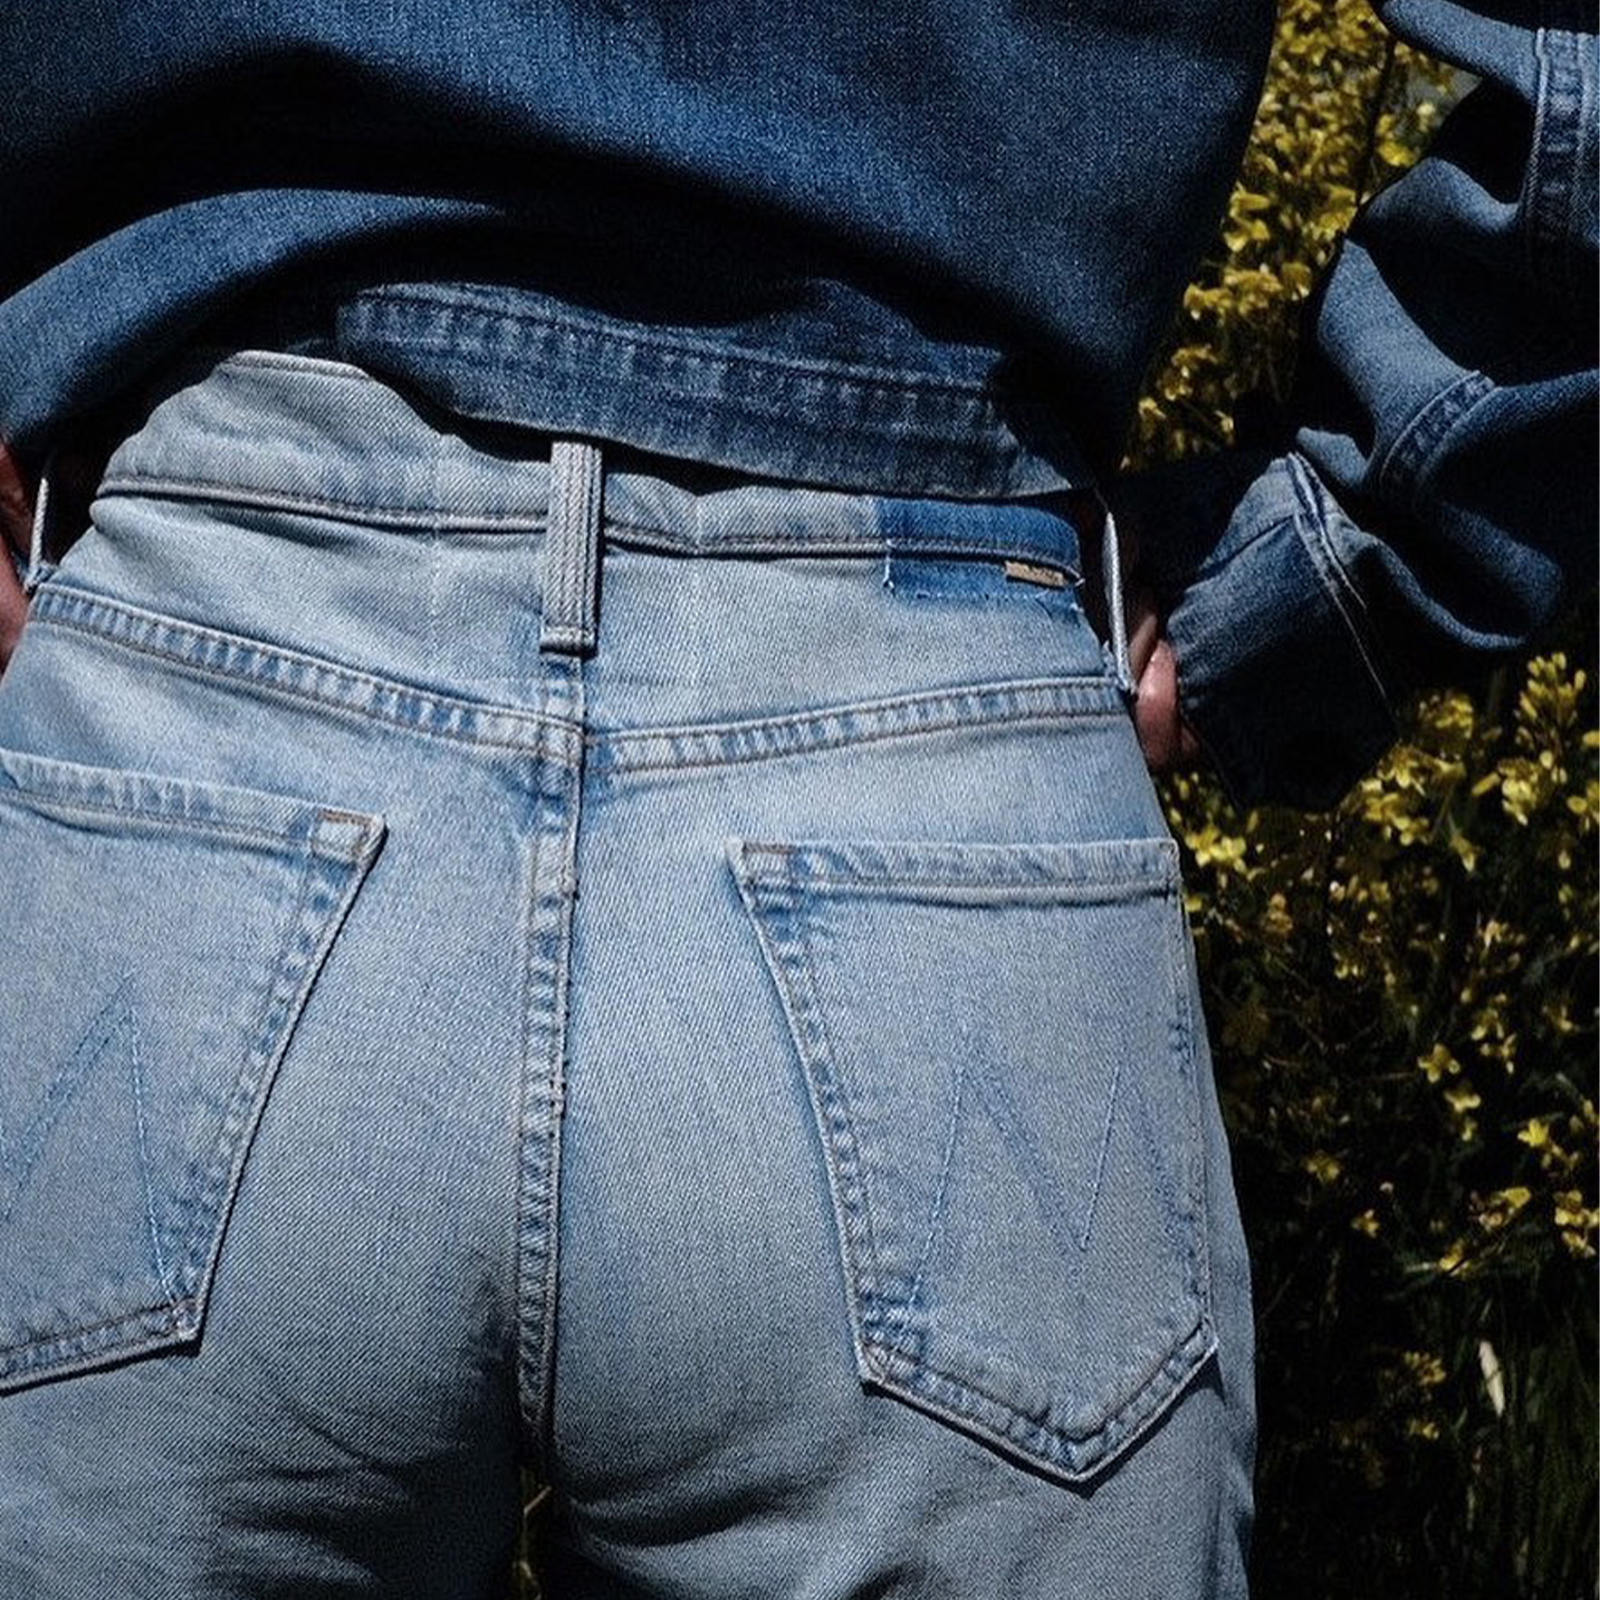 blue jeans, baby